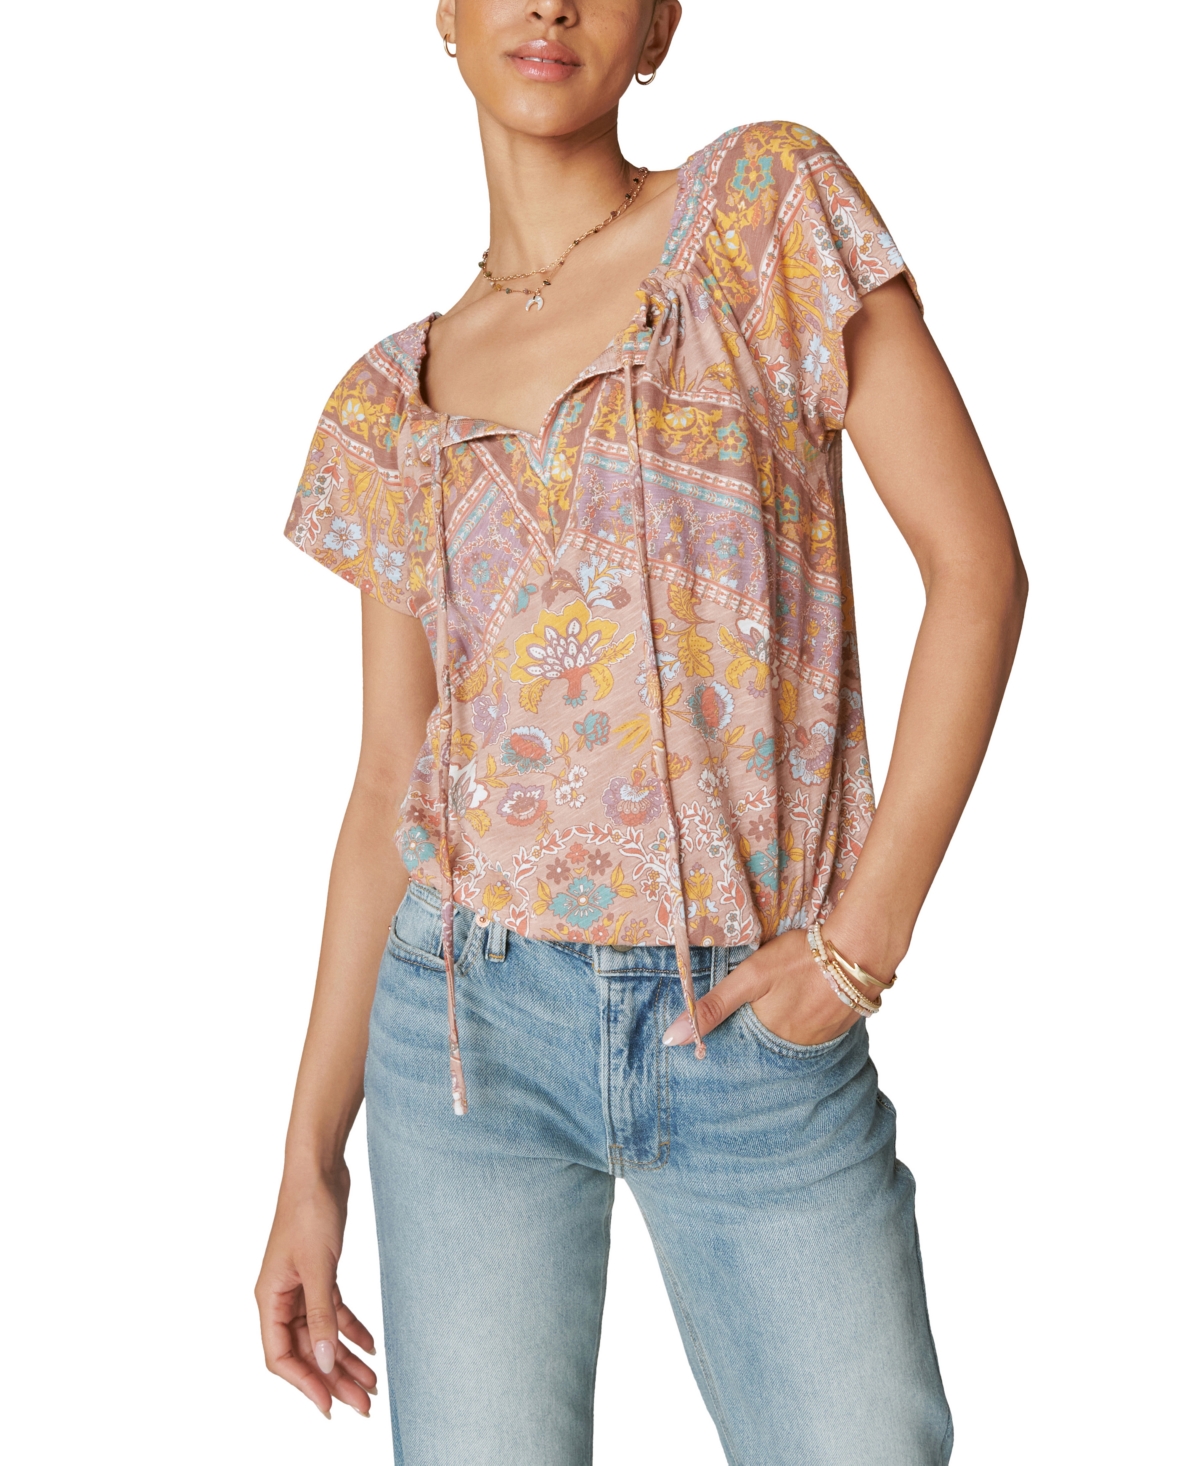 LUCKY BRAND WOMEN'S COTTON PRINTED PEASANT BUBBLE TOP